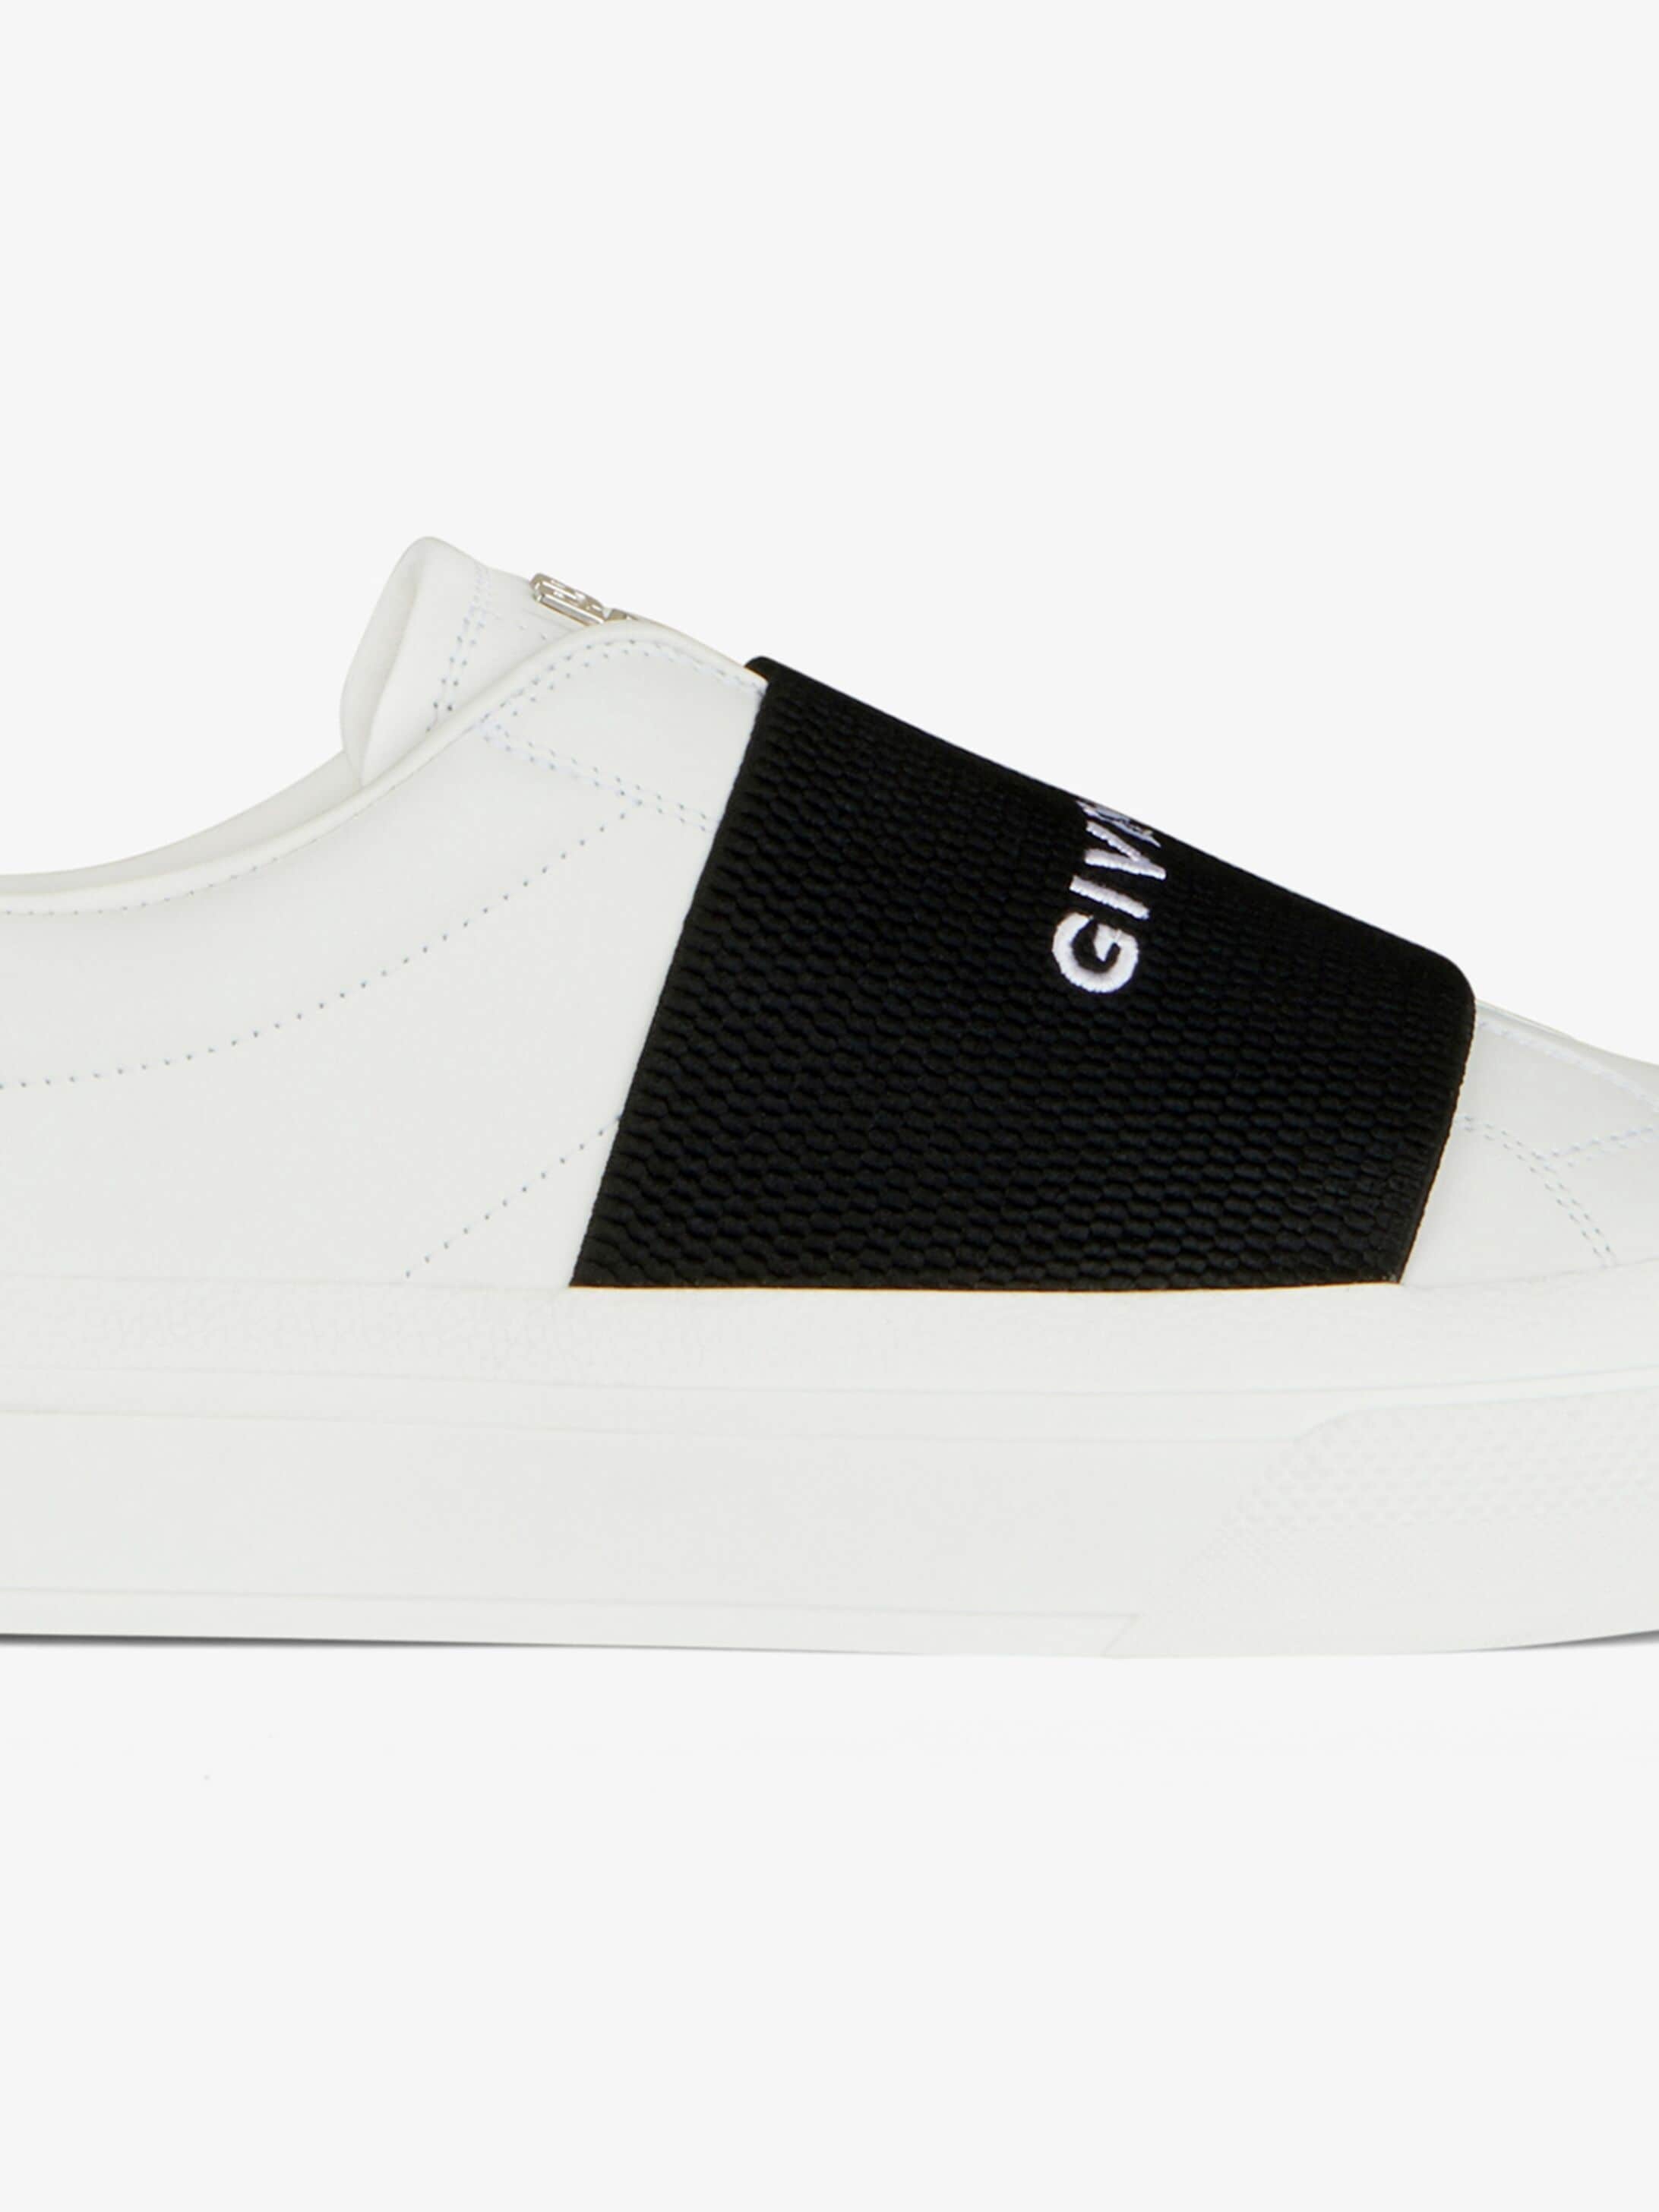 CITY SPORT SNEAKERS IN LEATHER WITH GIVENCHY STRAP - 6